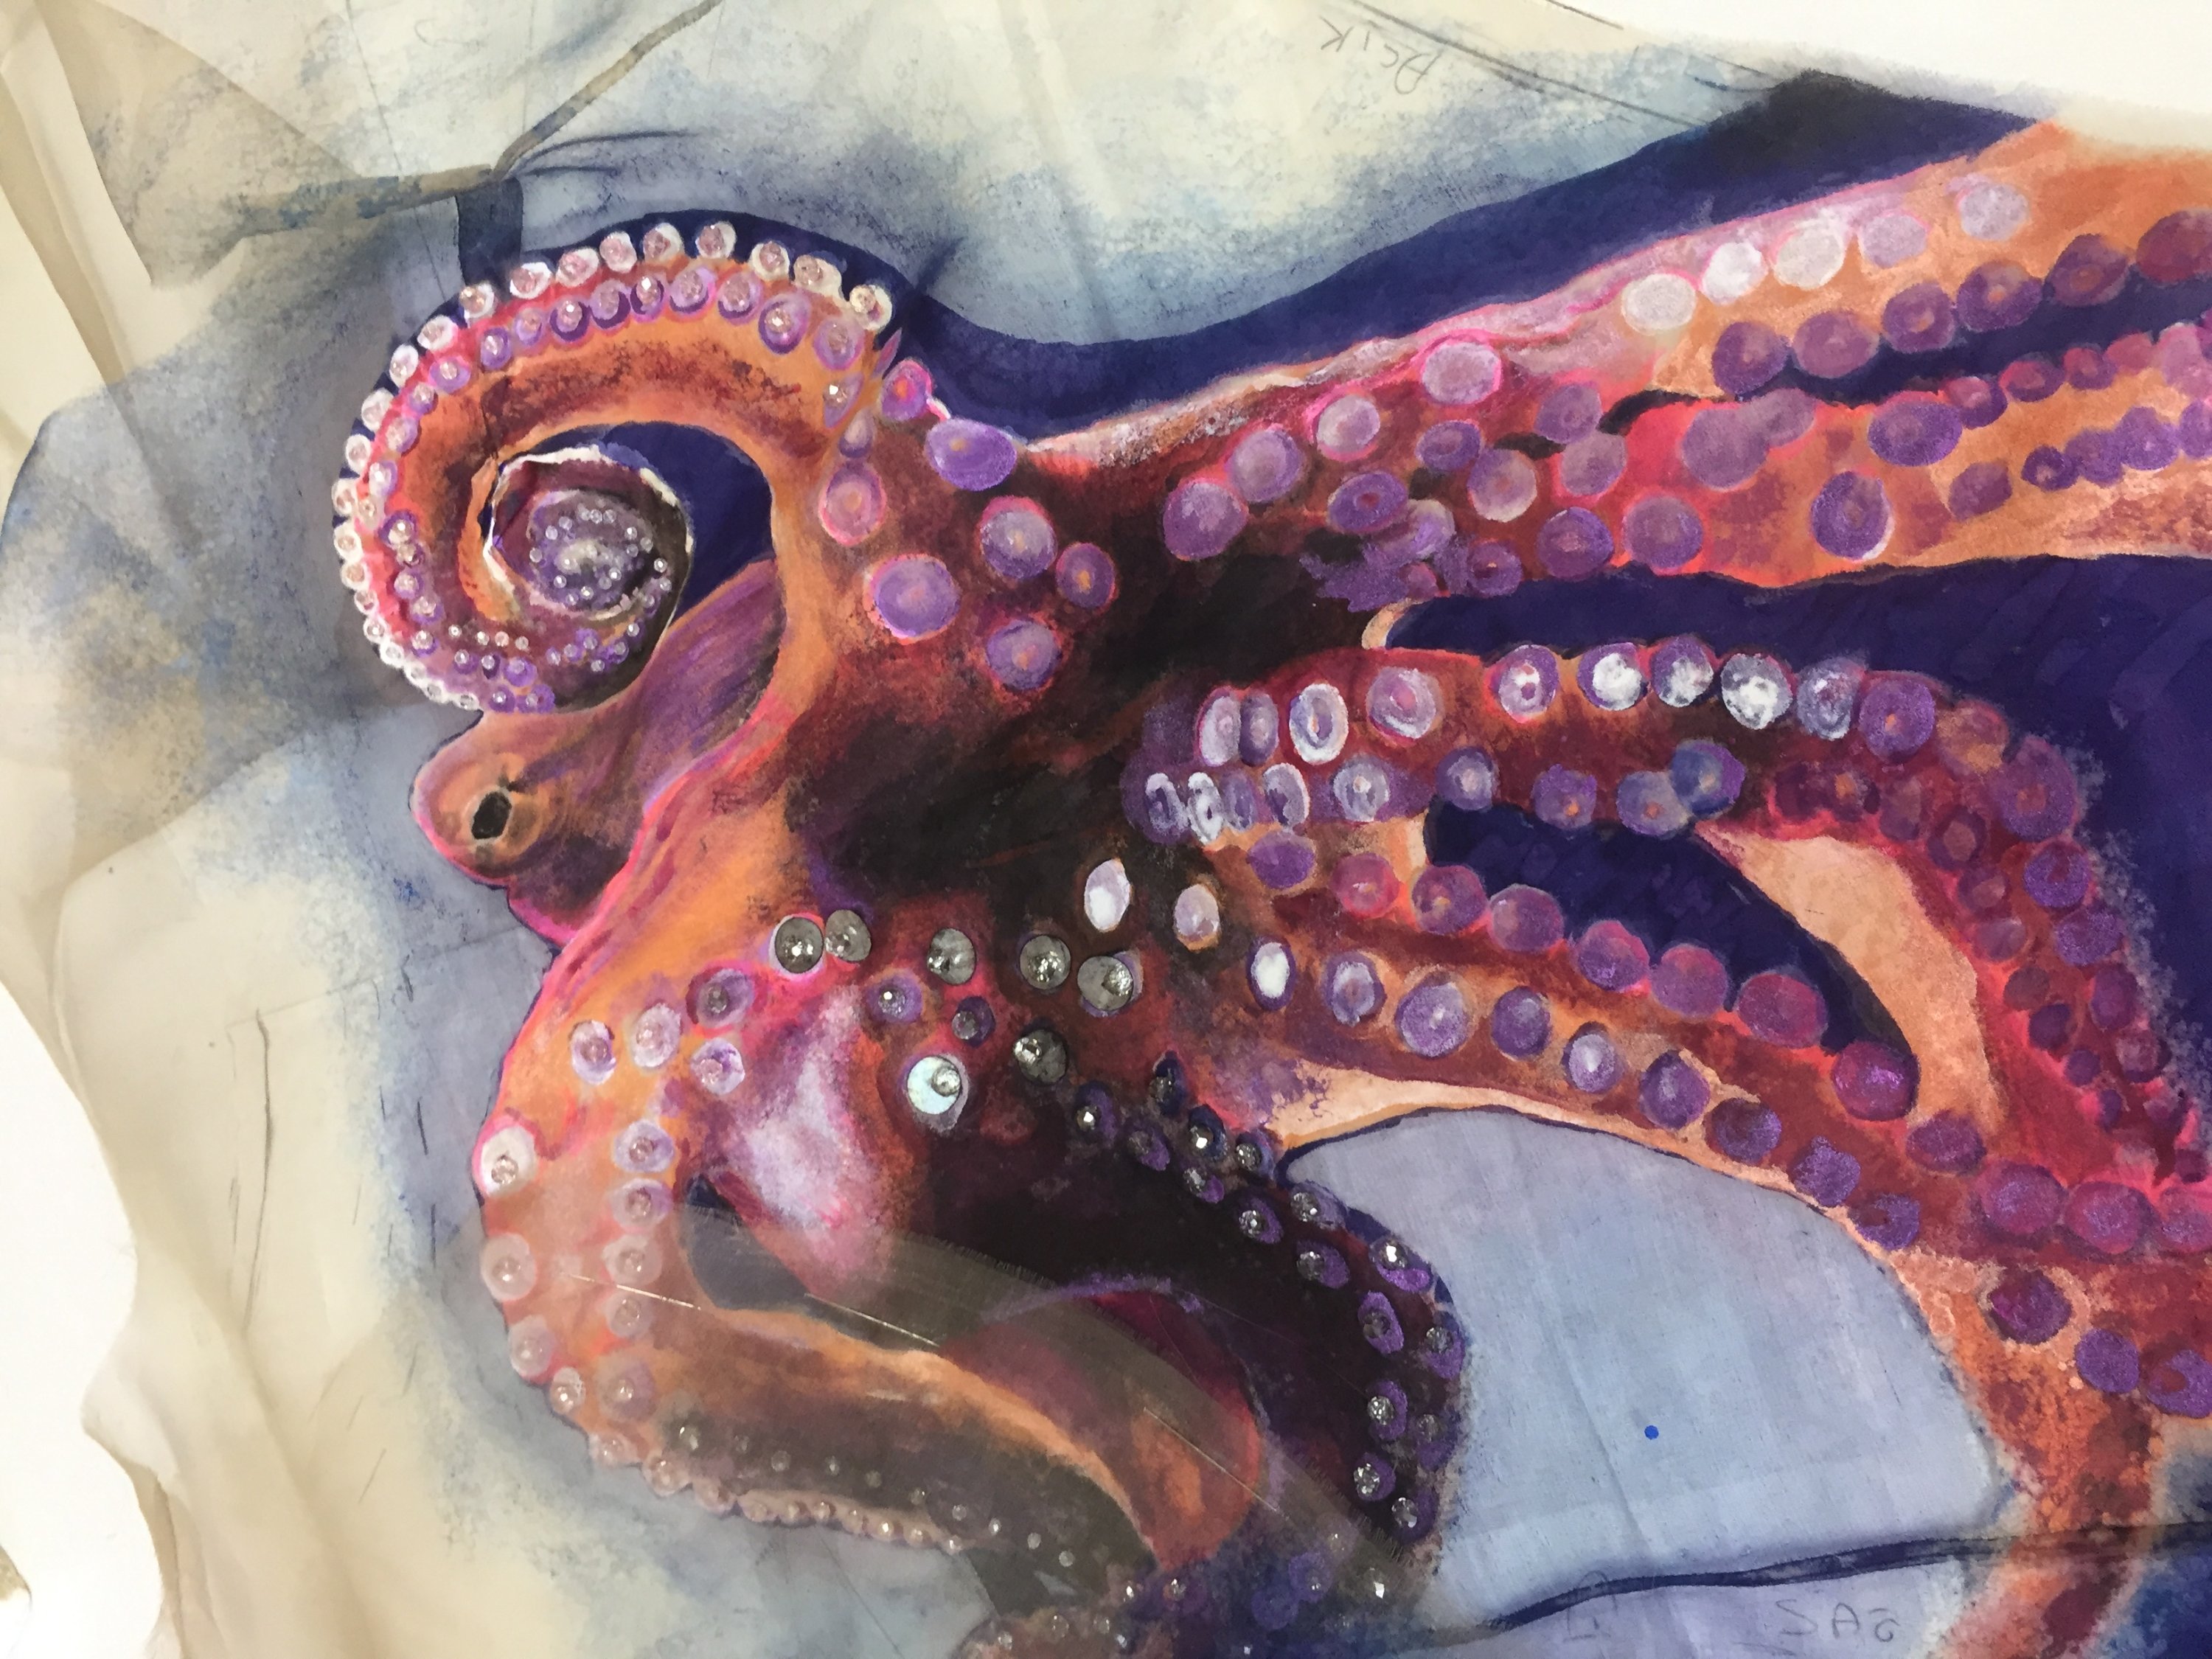 The octopus on the dress